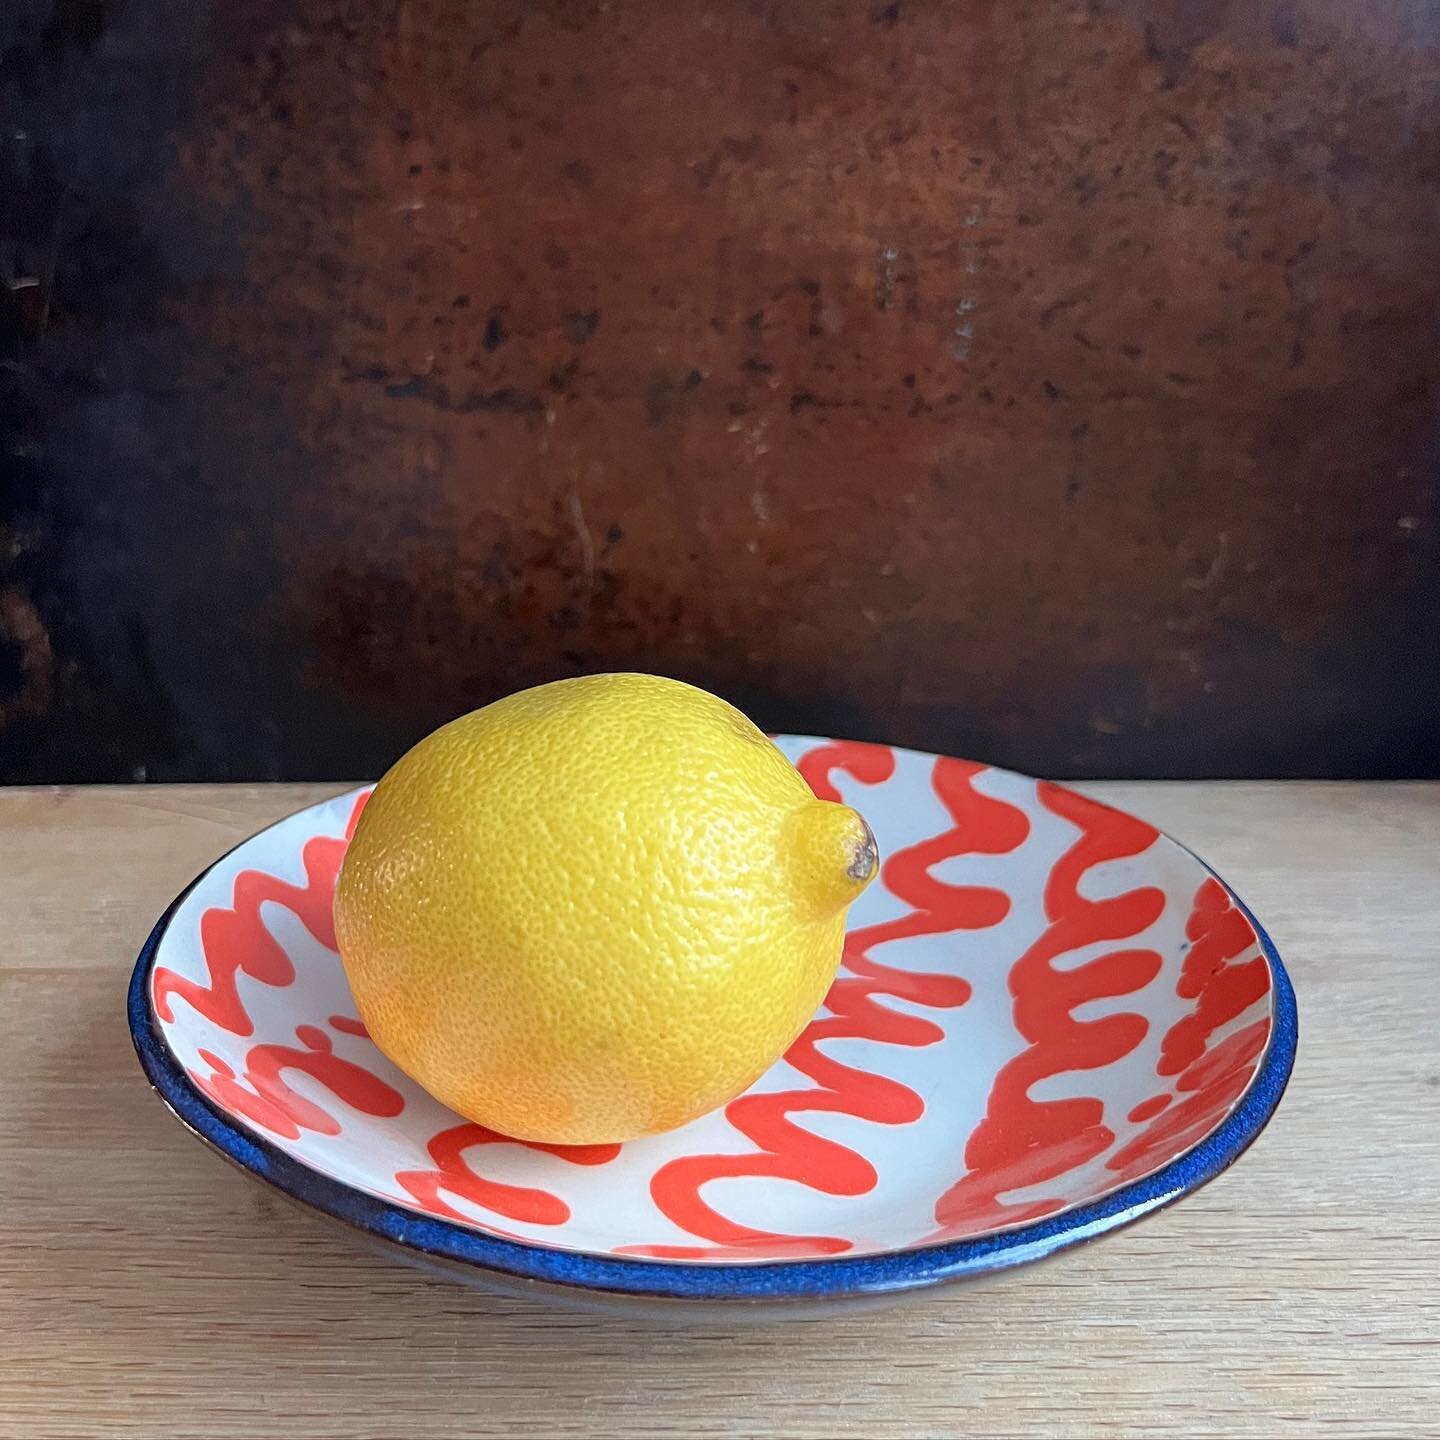 Every piece in my shop update will include a lemon for scale. Not in the actual purchase, but you know&hellip;the photo. :)

#coloredslip #masonstain #sliptrailing #slipware